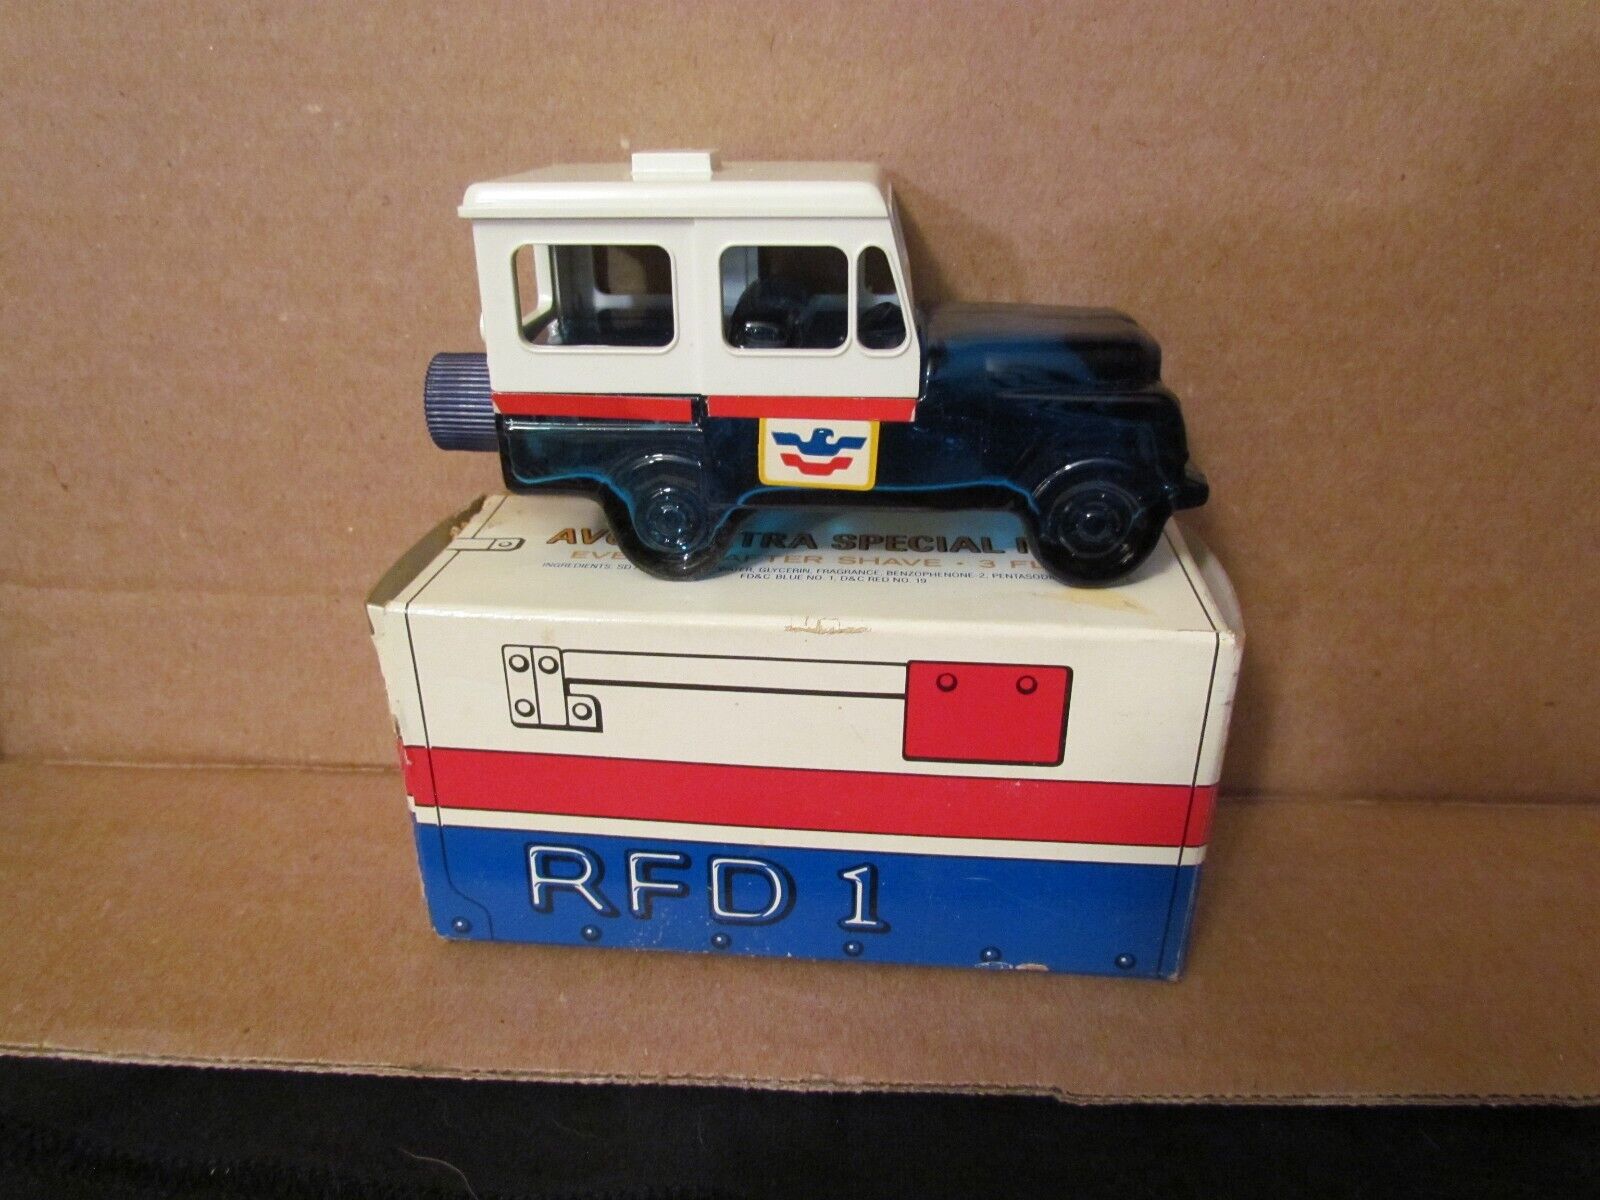 AVON RFD 1 Extra Special Mail Delivery Jeep Aftershave EMPTY Decanter w/box